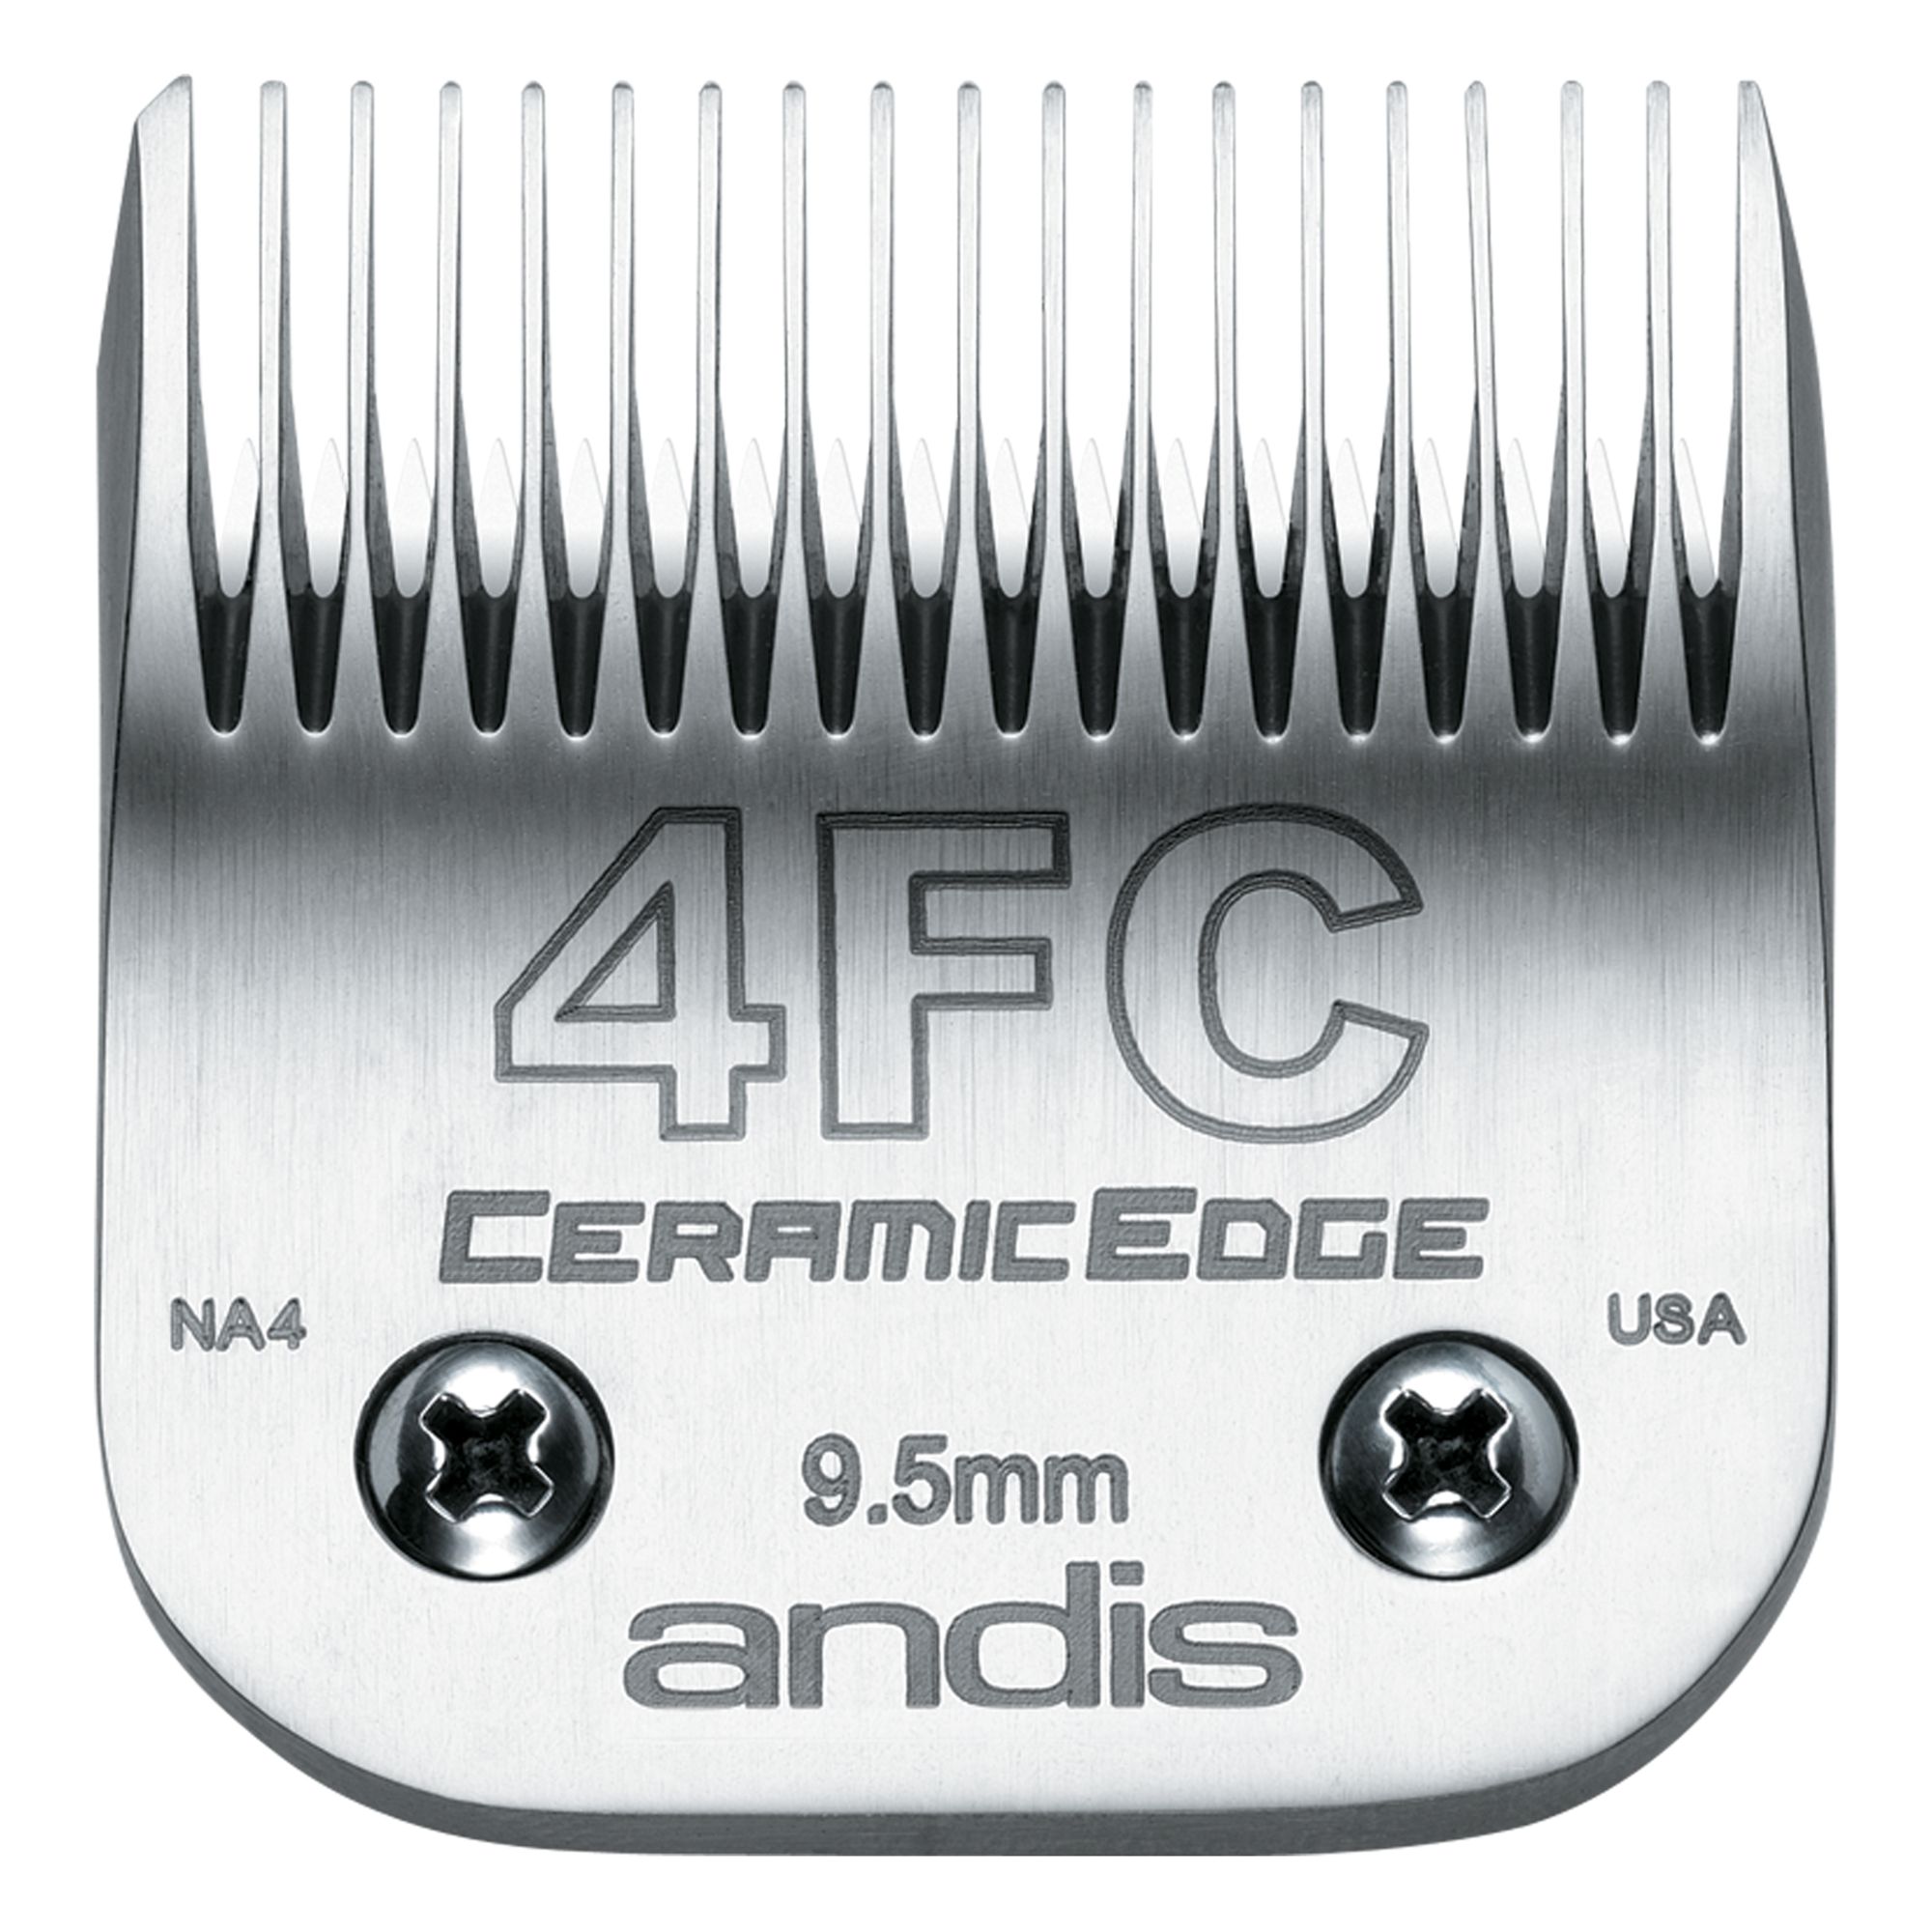 blades for andis trimmer